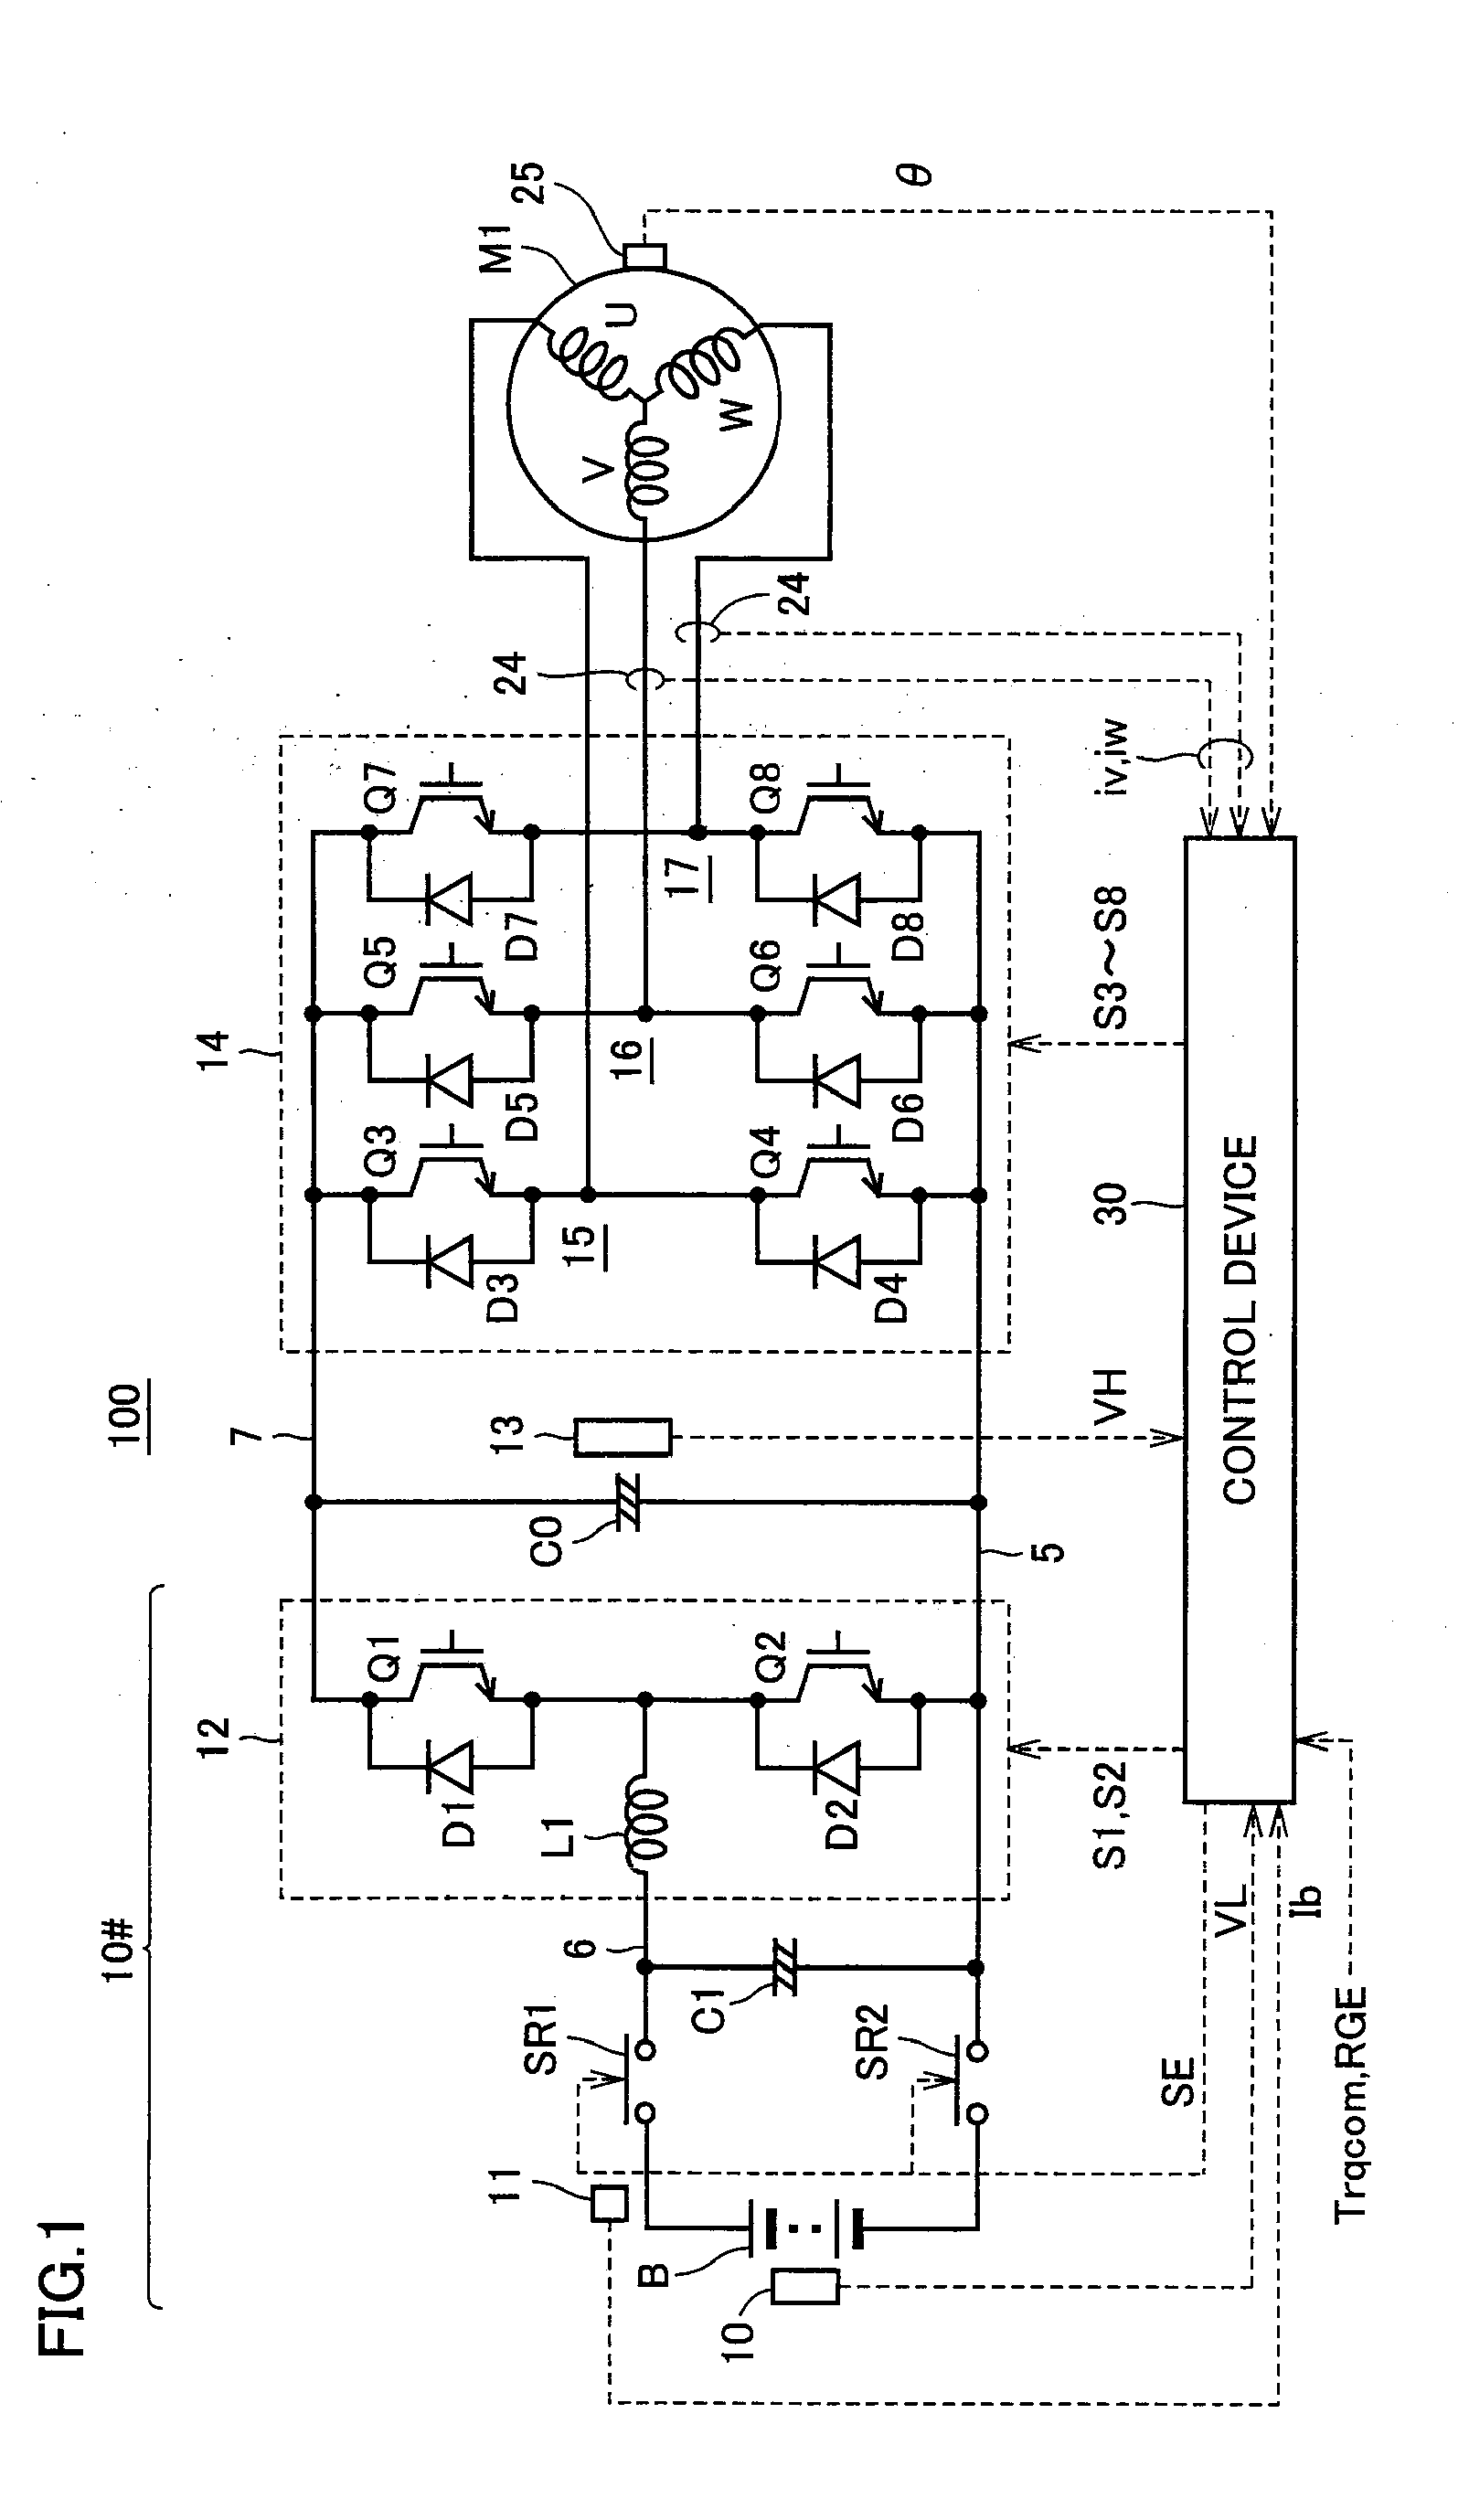 Control device for ac motor